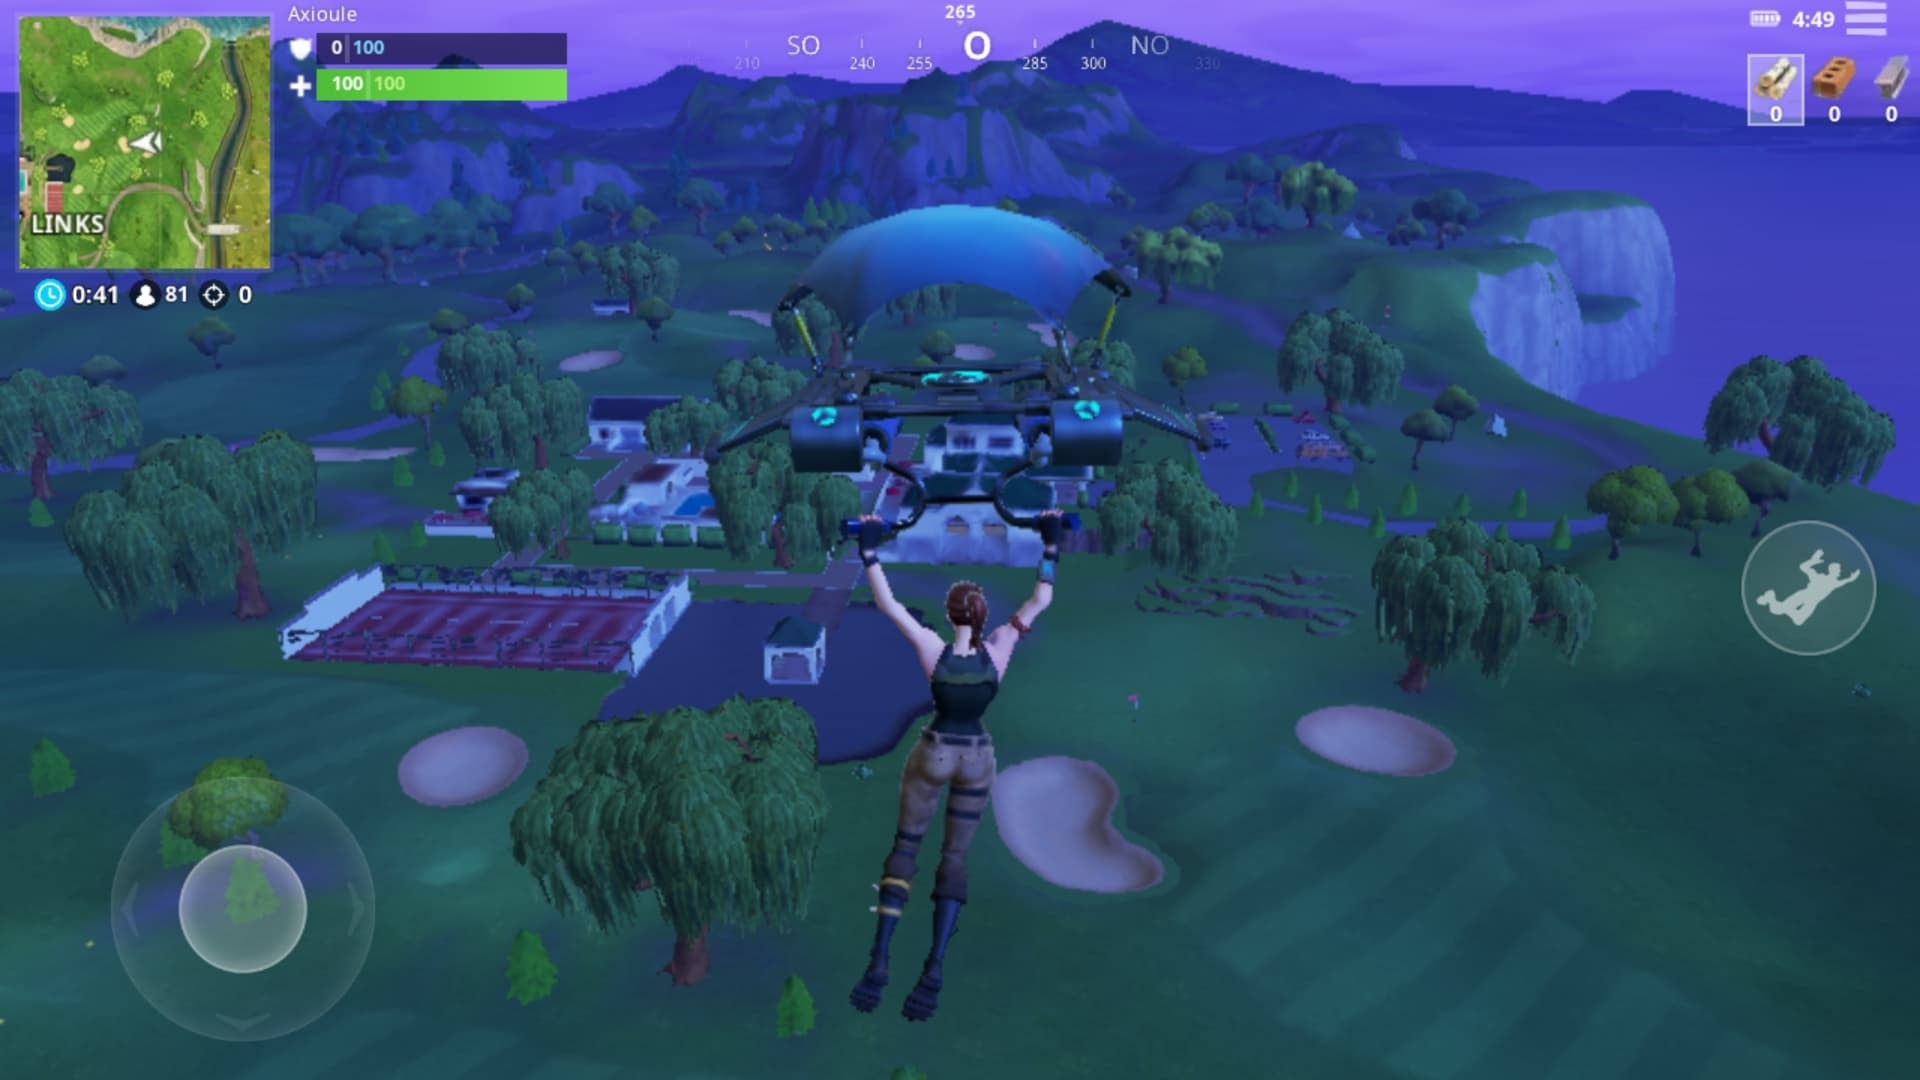 Jouer A Fortnite Sur Android